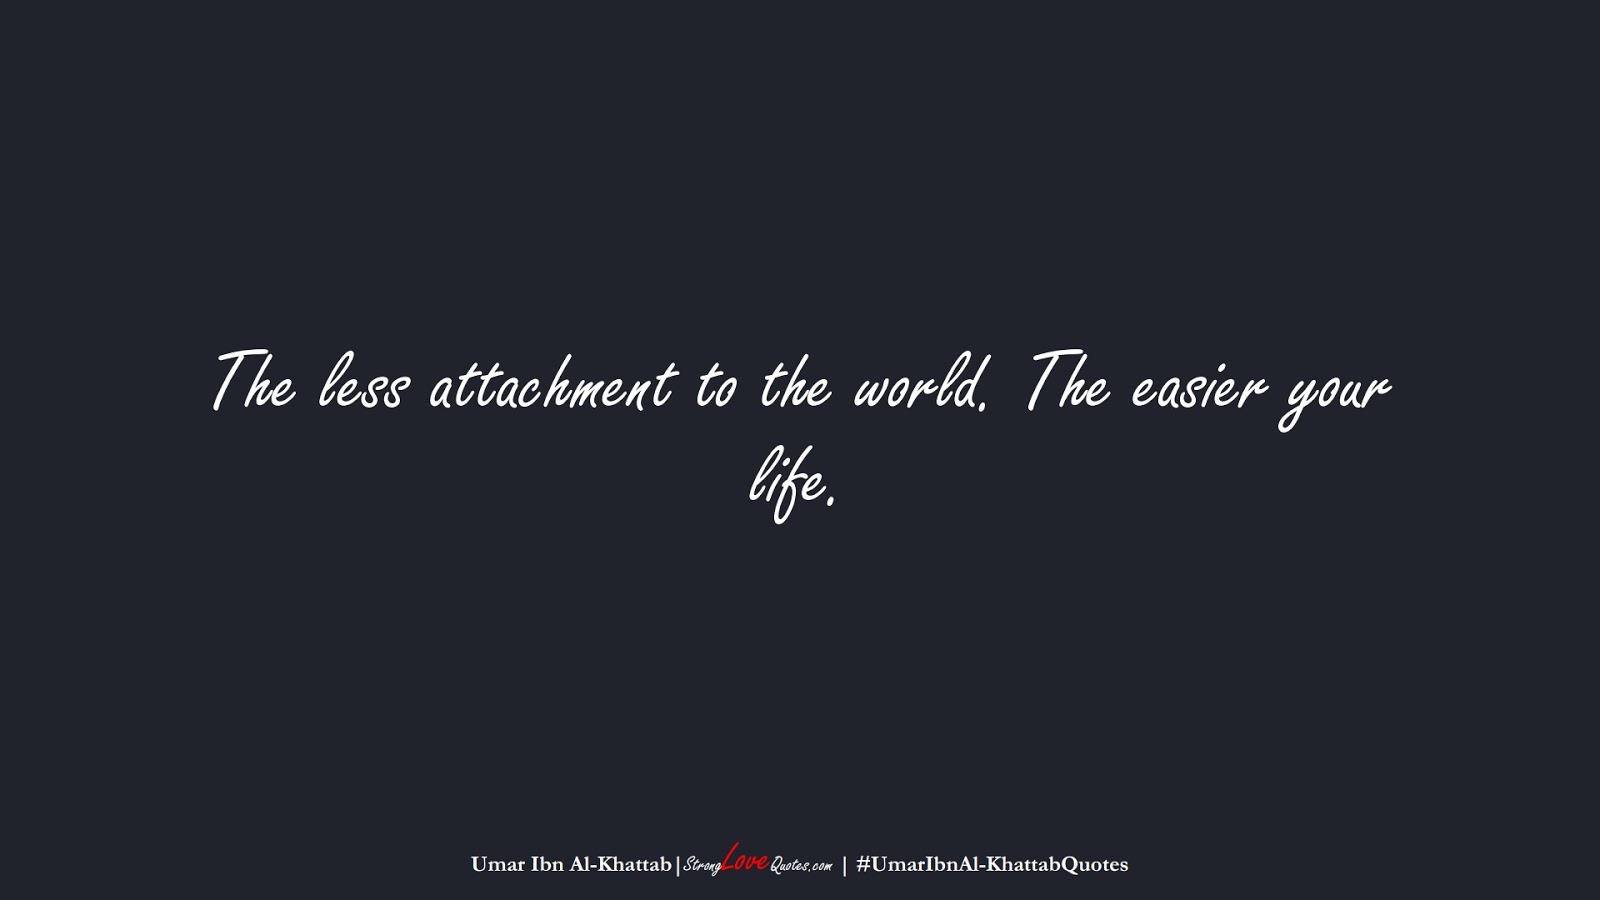 The less attachment to the world. The easier your life. (Umar Ibn Al-Khattab);  #UmarIbnAl-KhattabQuotes